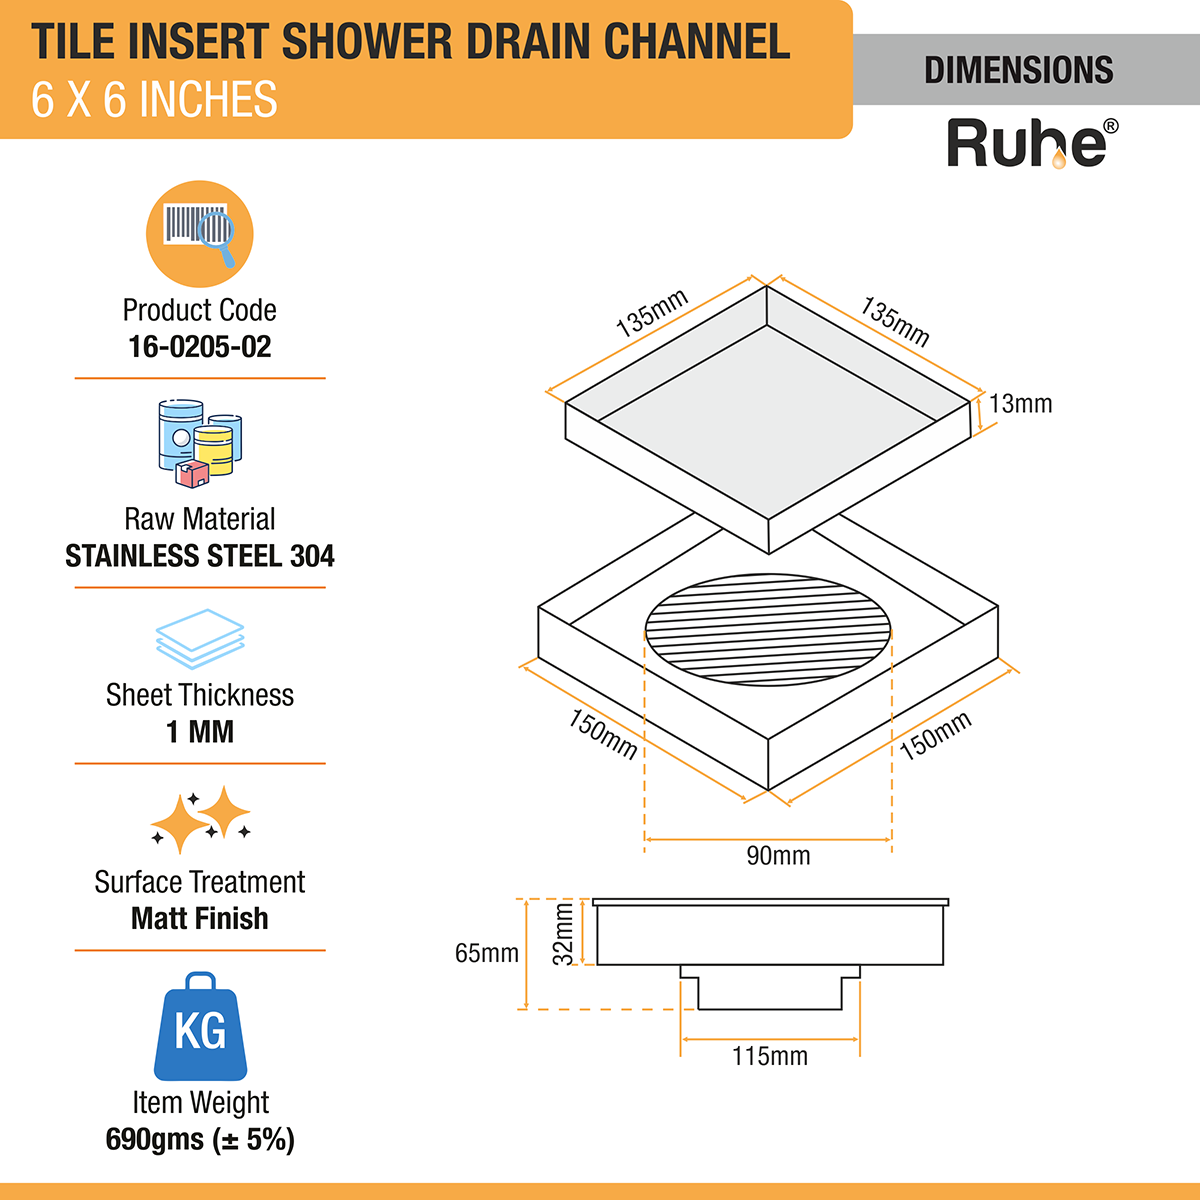 Tile Insert Shower Drain Channel (6 x 6 Inches) with Cockroach Trap (304 Grade) dimensions and size